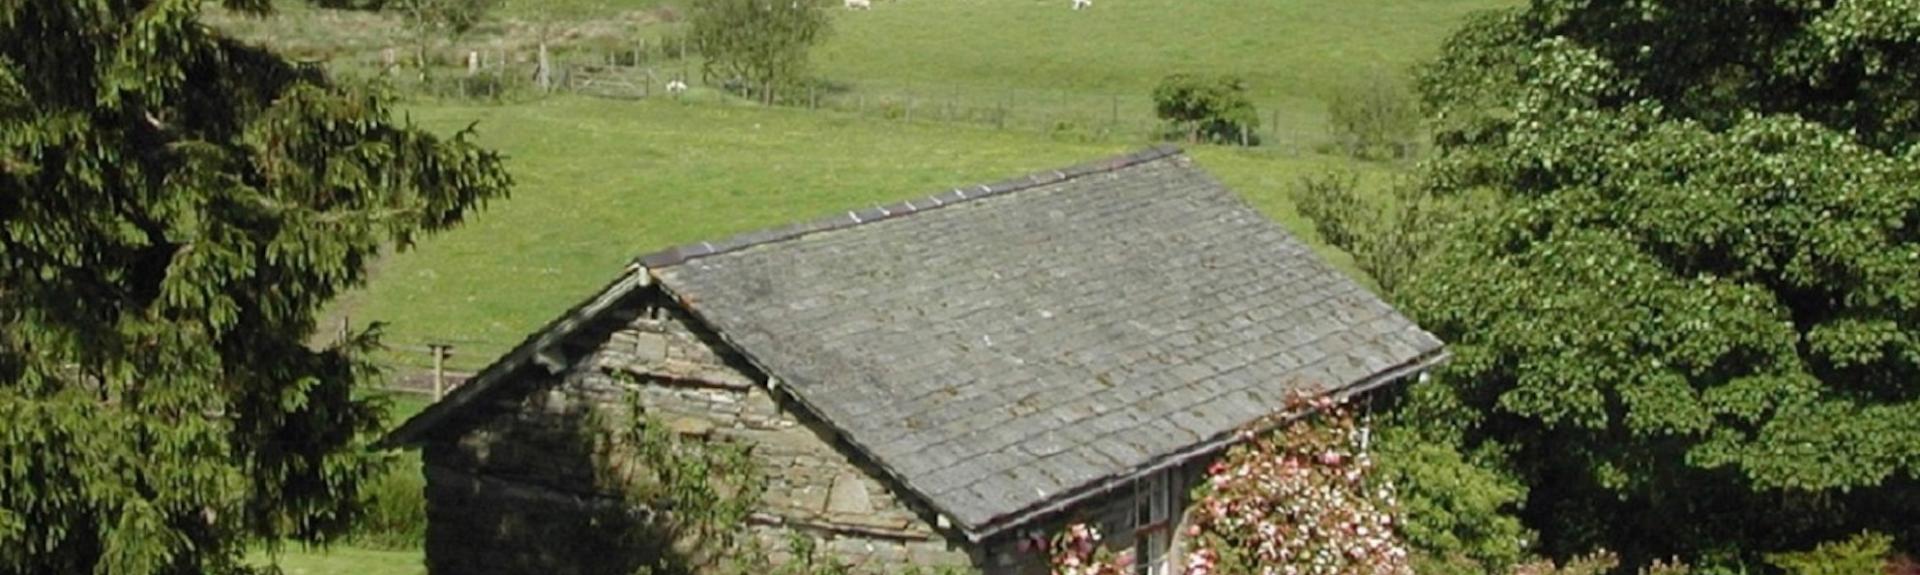 Enjoy Lake District rural views from Hatters Cottage